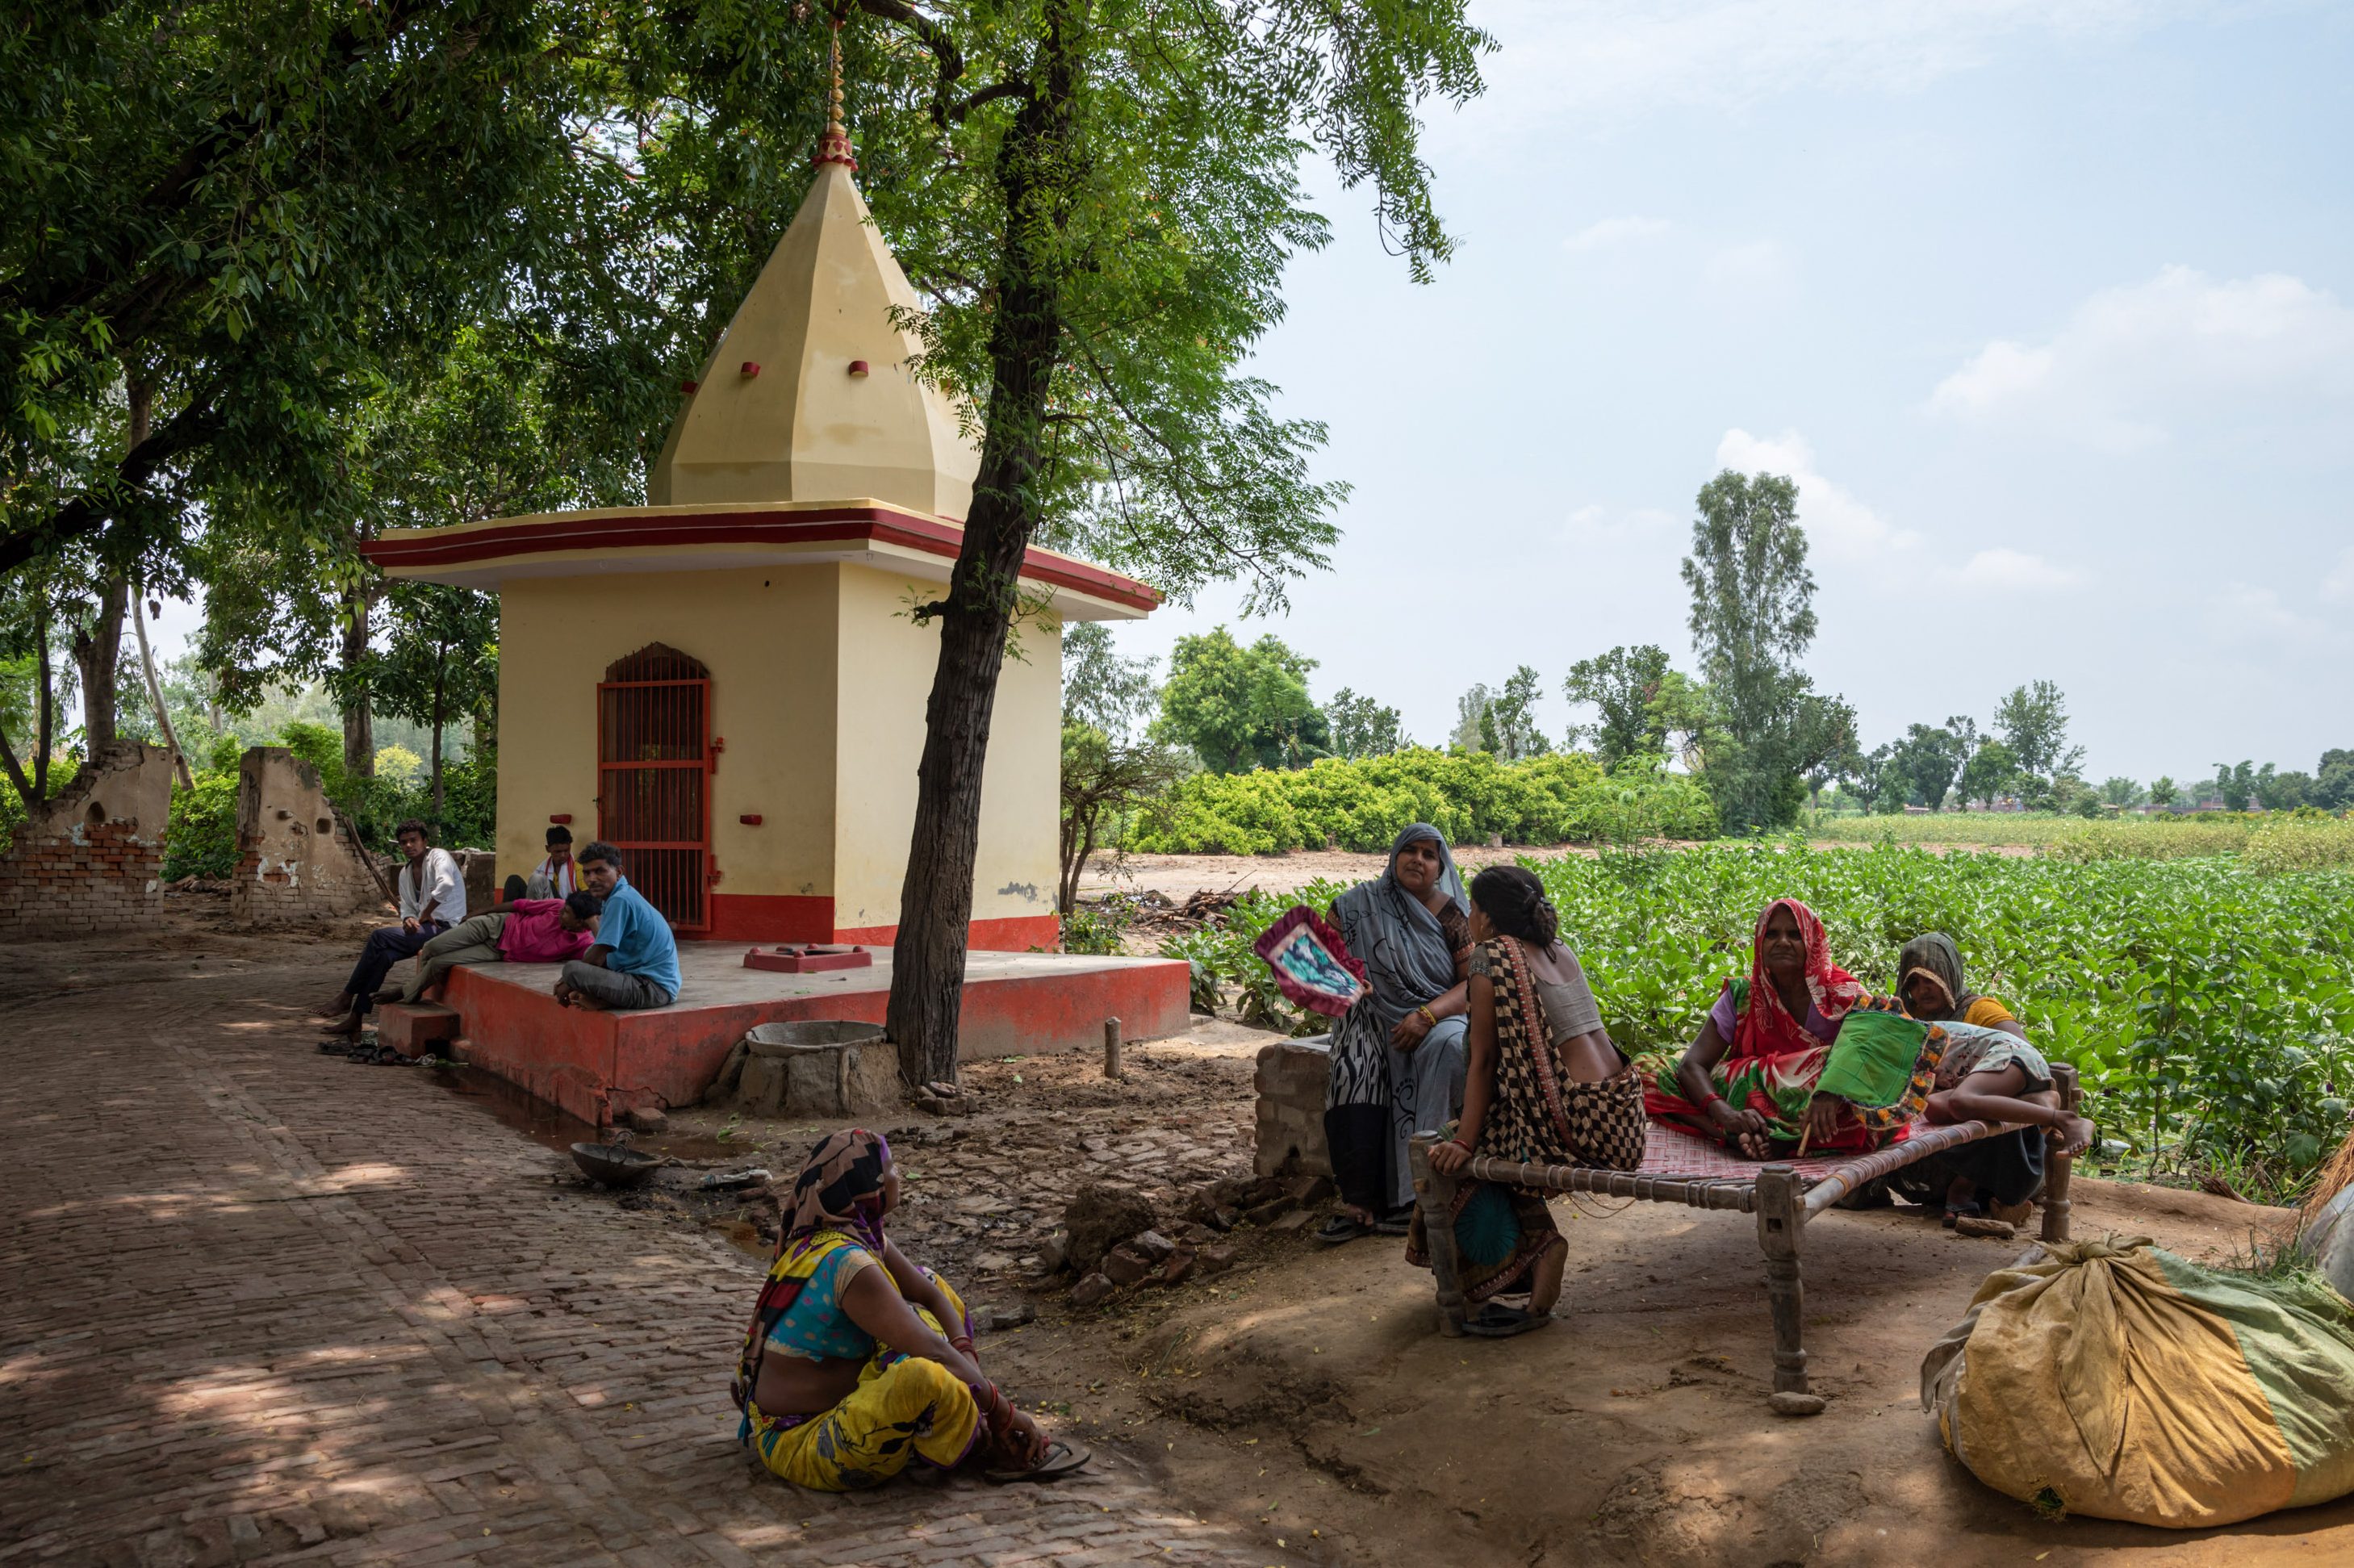 People sit under the banyan tree next to the temple to escape the heat.